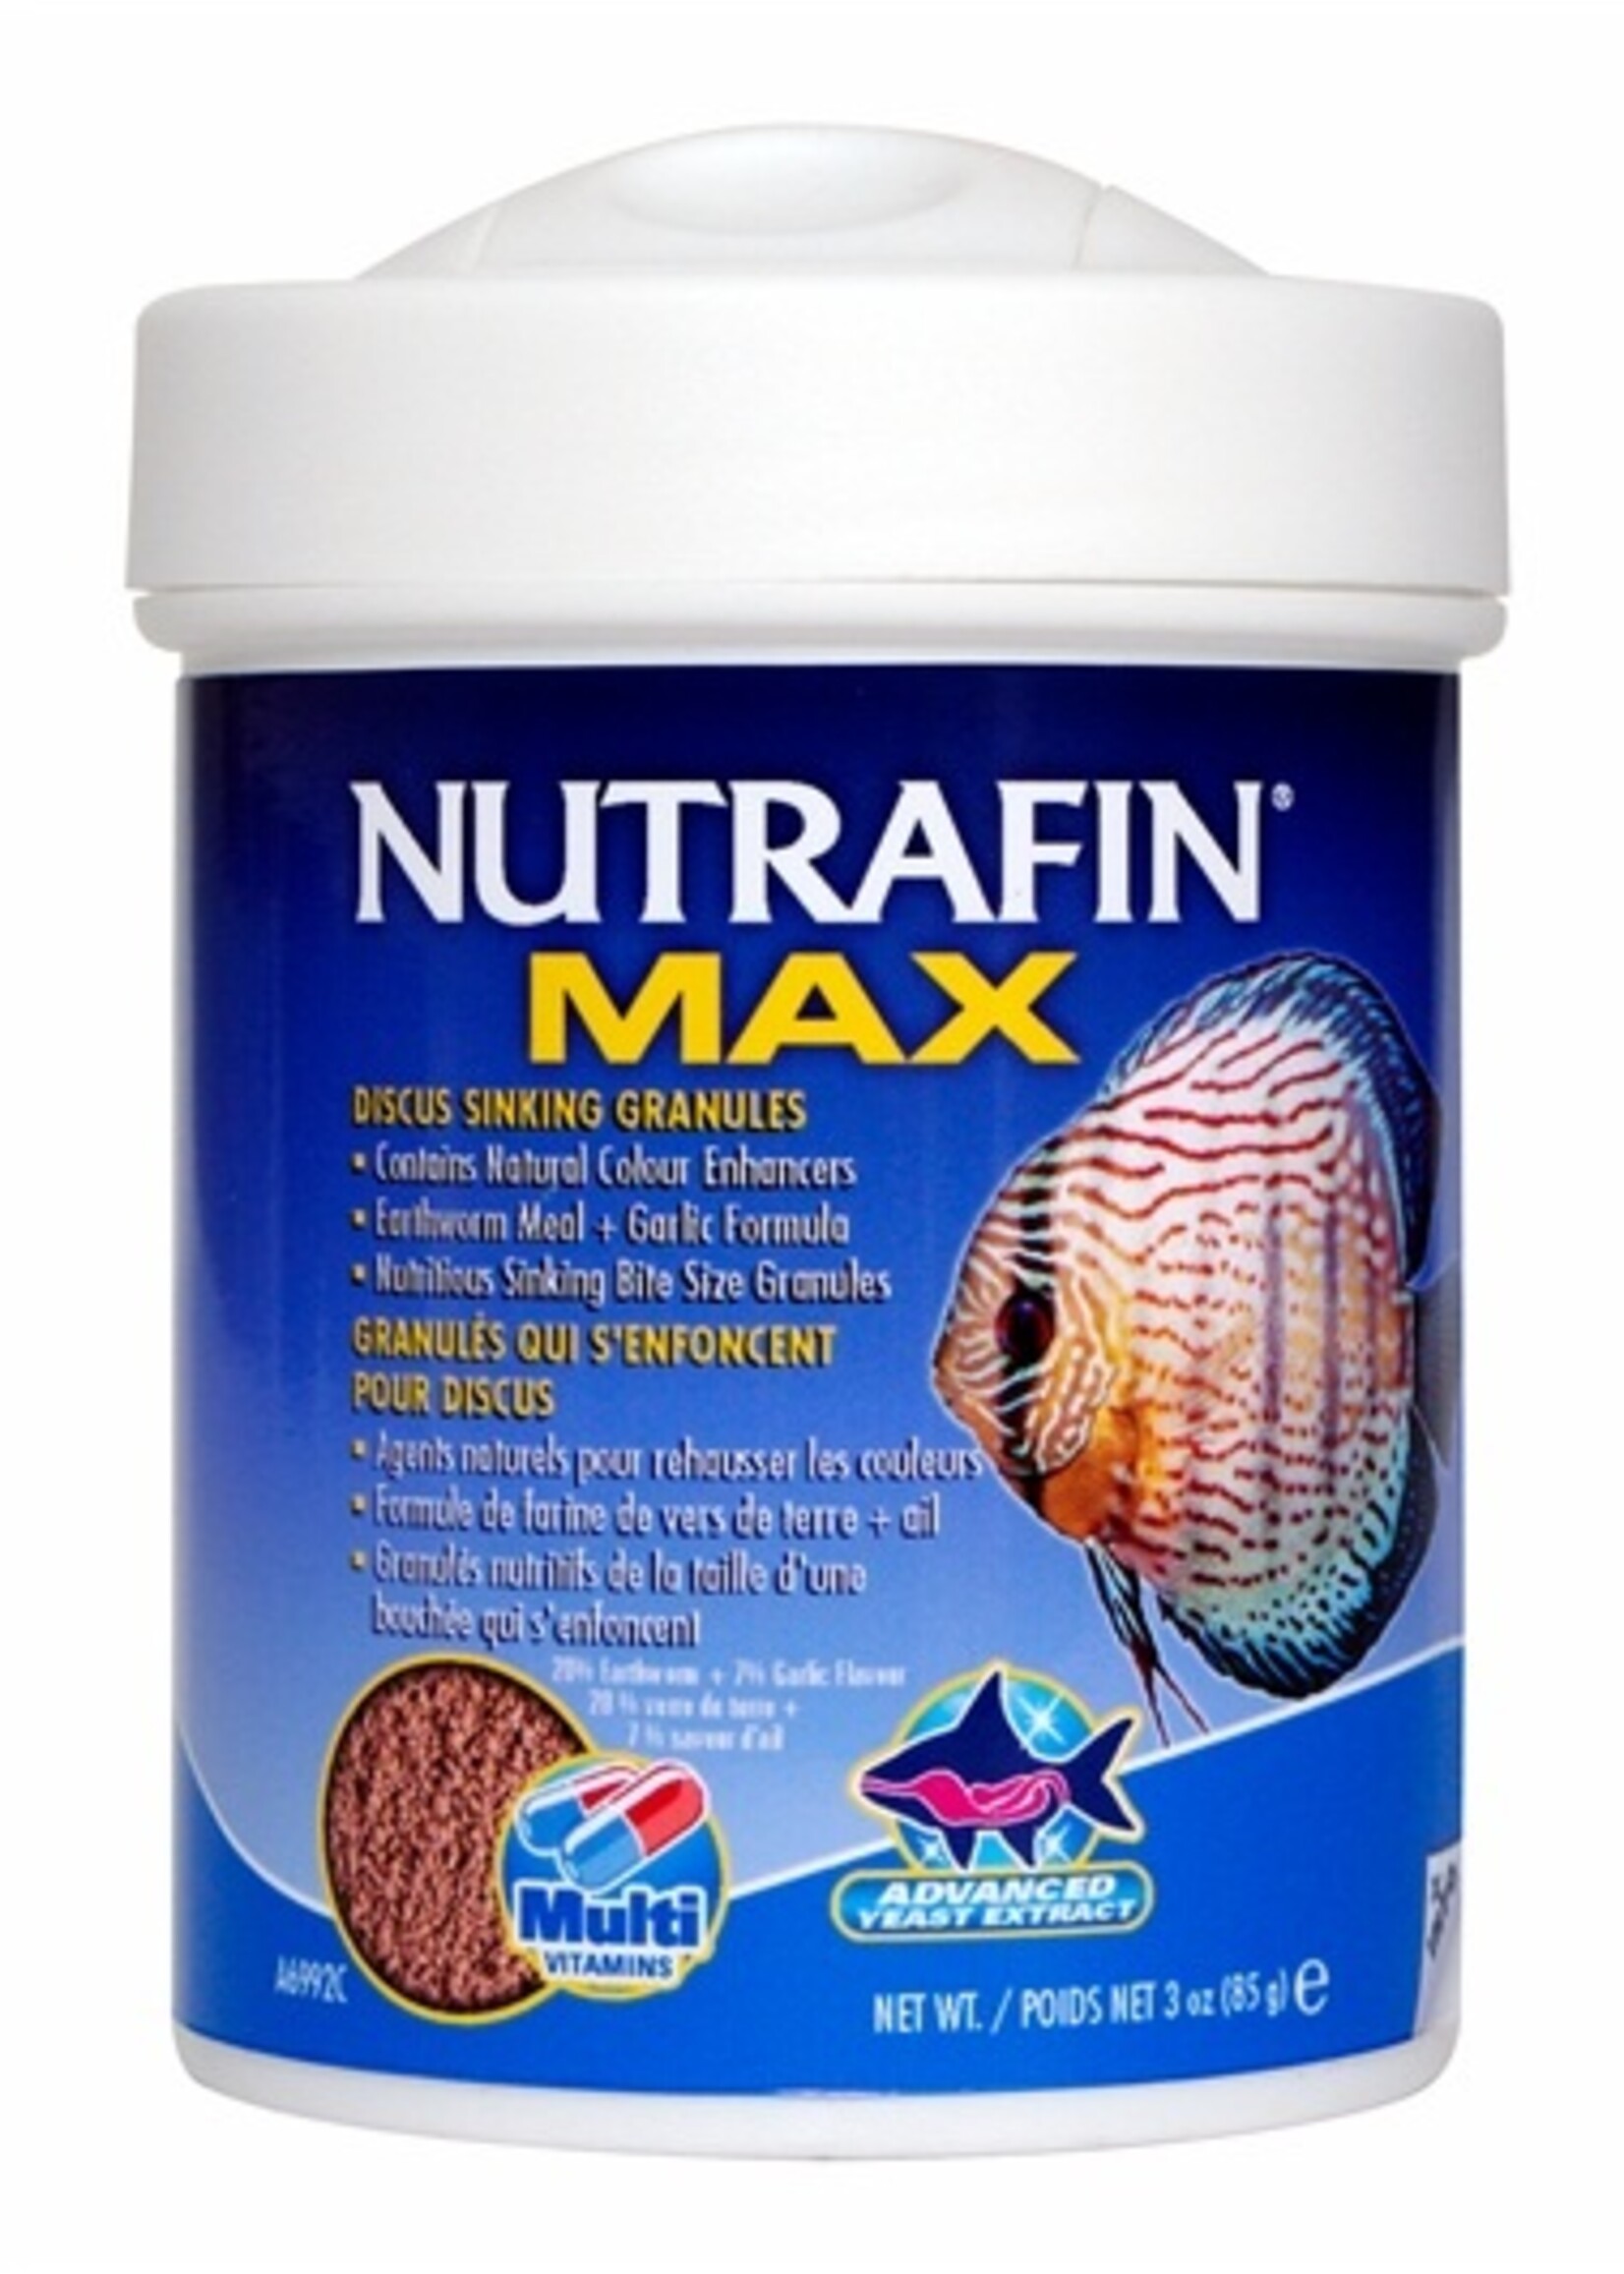 Nutrafin Nutrafin Max Discus Sinking Granules